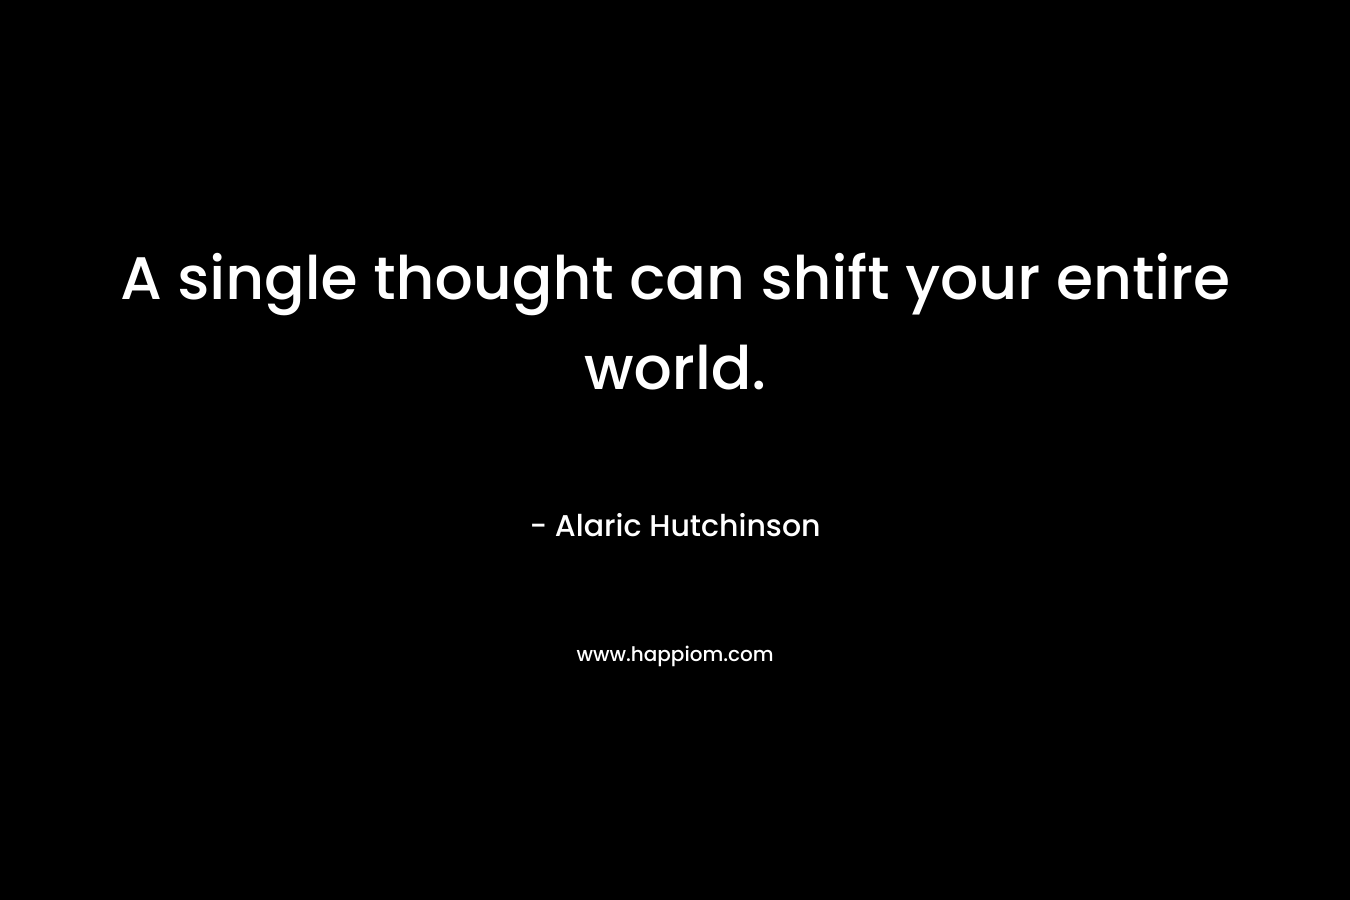 A single thought can shift your entire world.